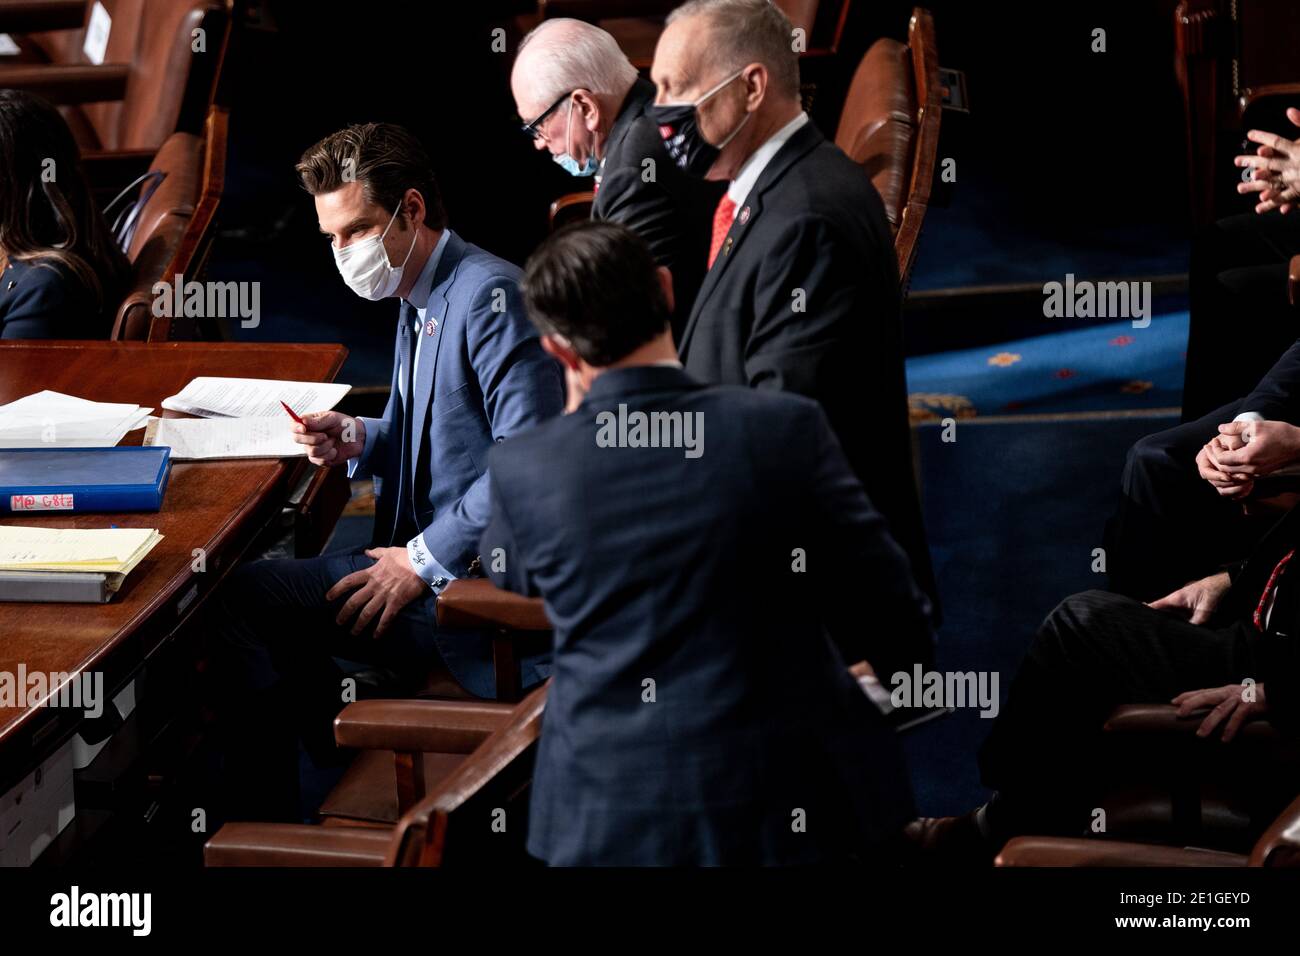 Washington, United States Of America. 06th Jan, 2021. House Republicans confer during a Joint session of Congress to certify the 2020 Electoral College results on Capitol Hill in Washington, DC on January 6, 2020. Credit: Erin Schaff/Pool via CNP | usage worldwide Credit: dpa/Alamy Live News Stock Photo